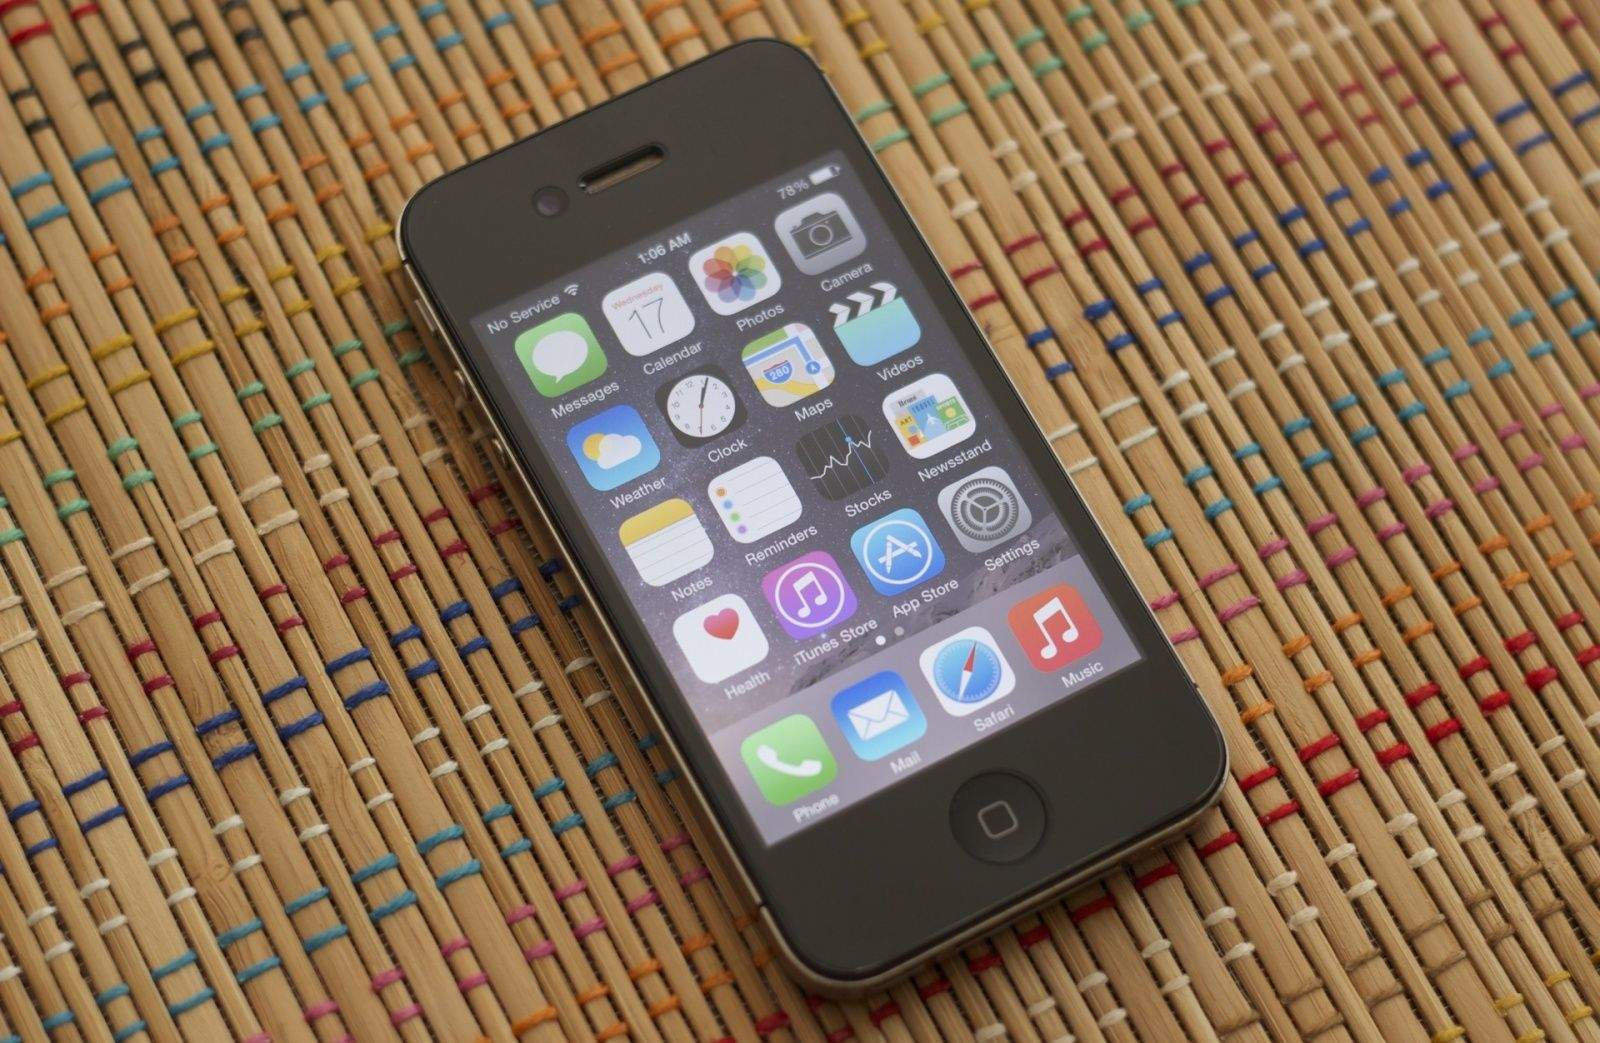 iOS 8.1.1 is still a bad choice for iPhone 4s owners. Photo: Ars Technica